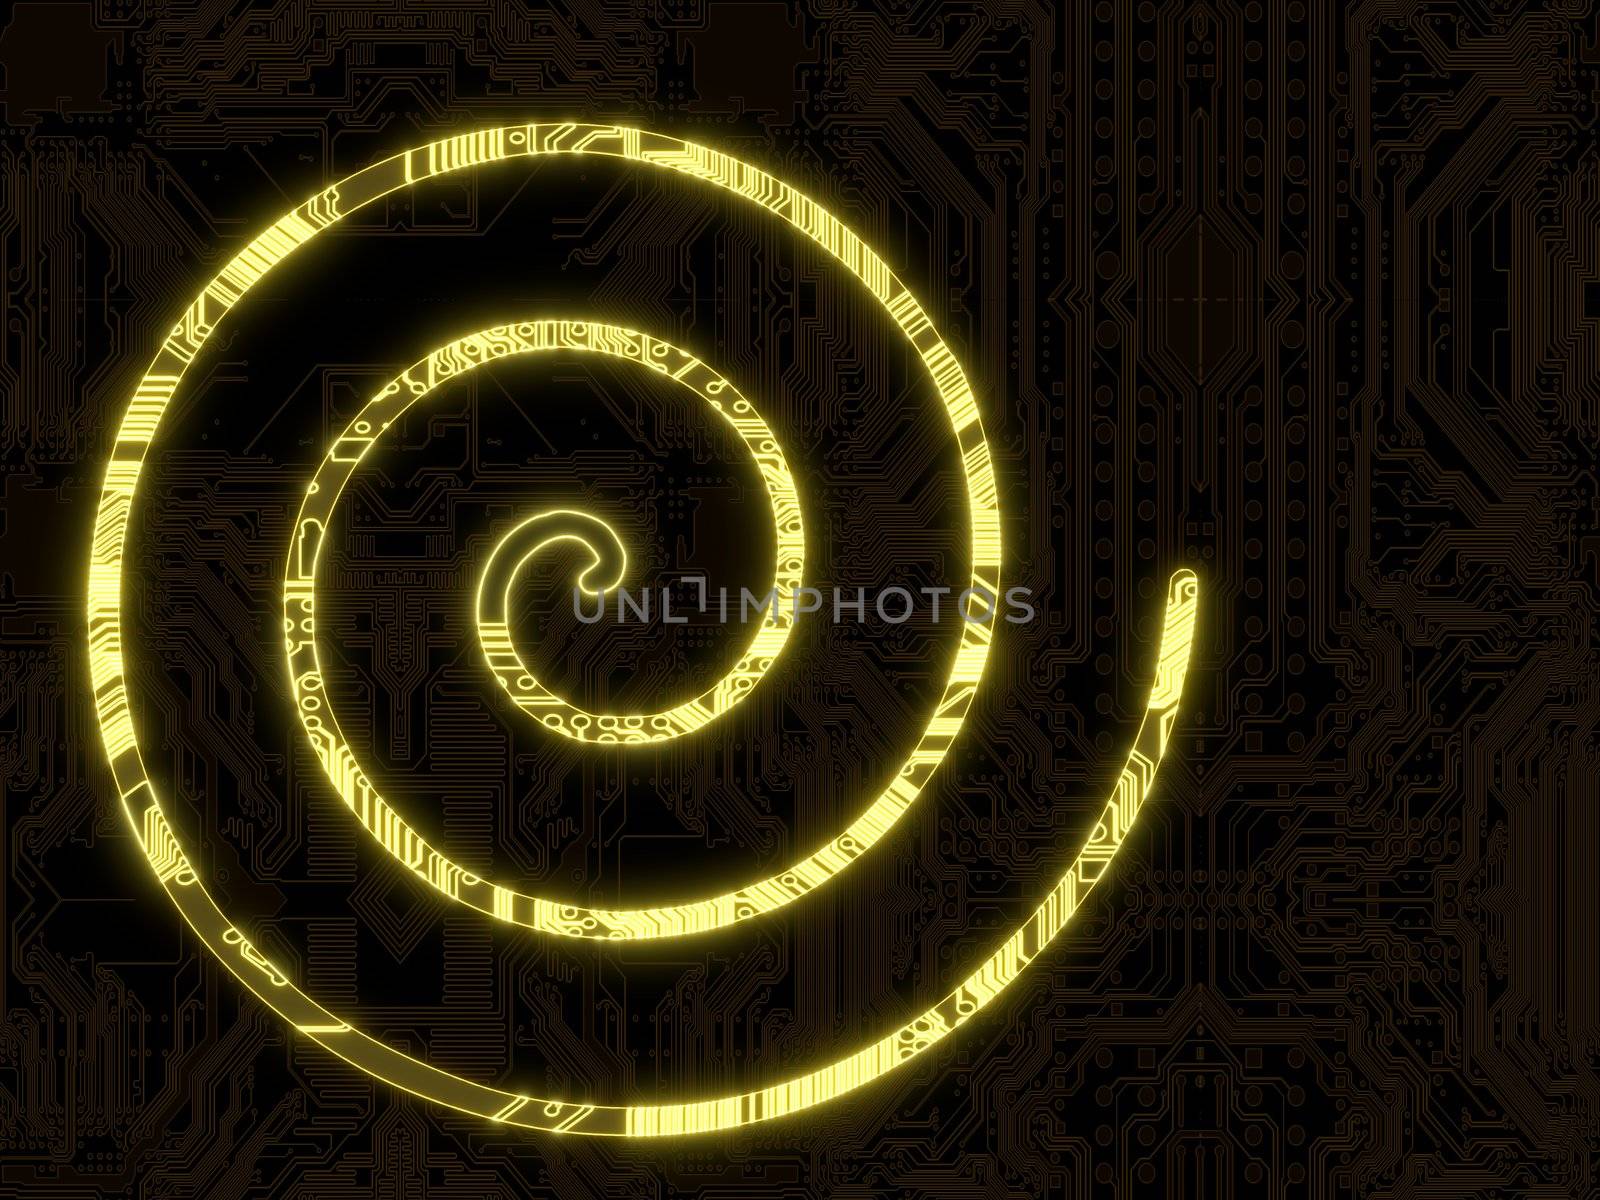 Steel blue  flare 3d graphic with electronic helix symbol in a dark background on a computer chip